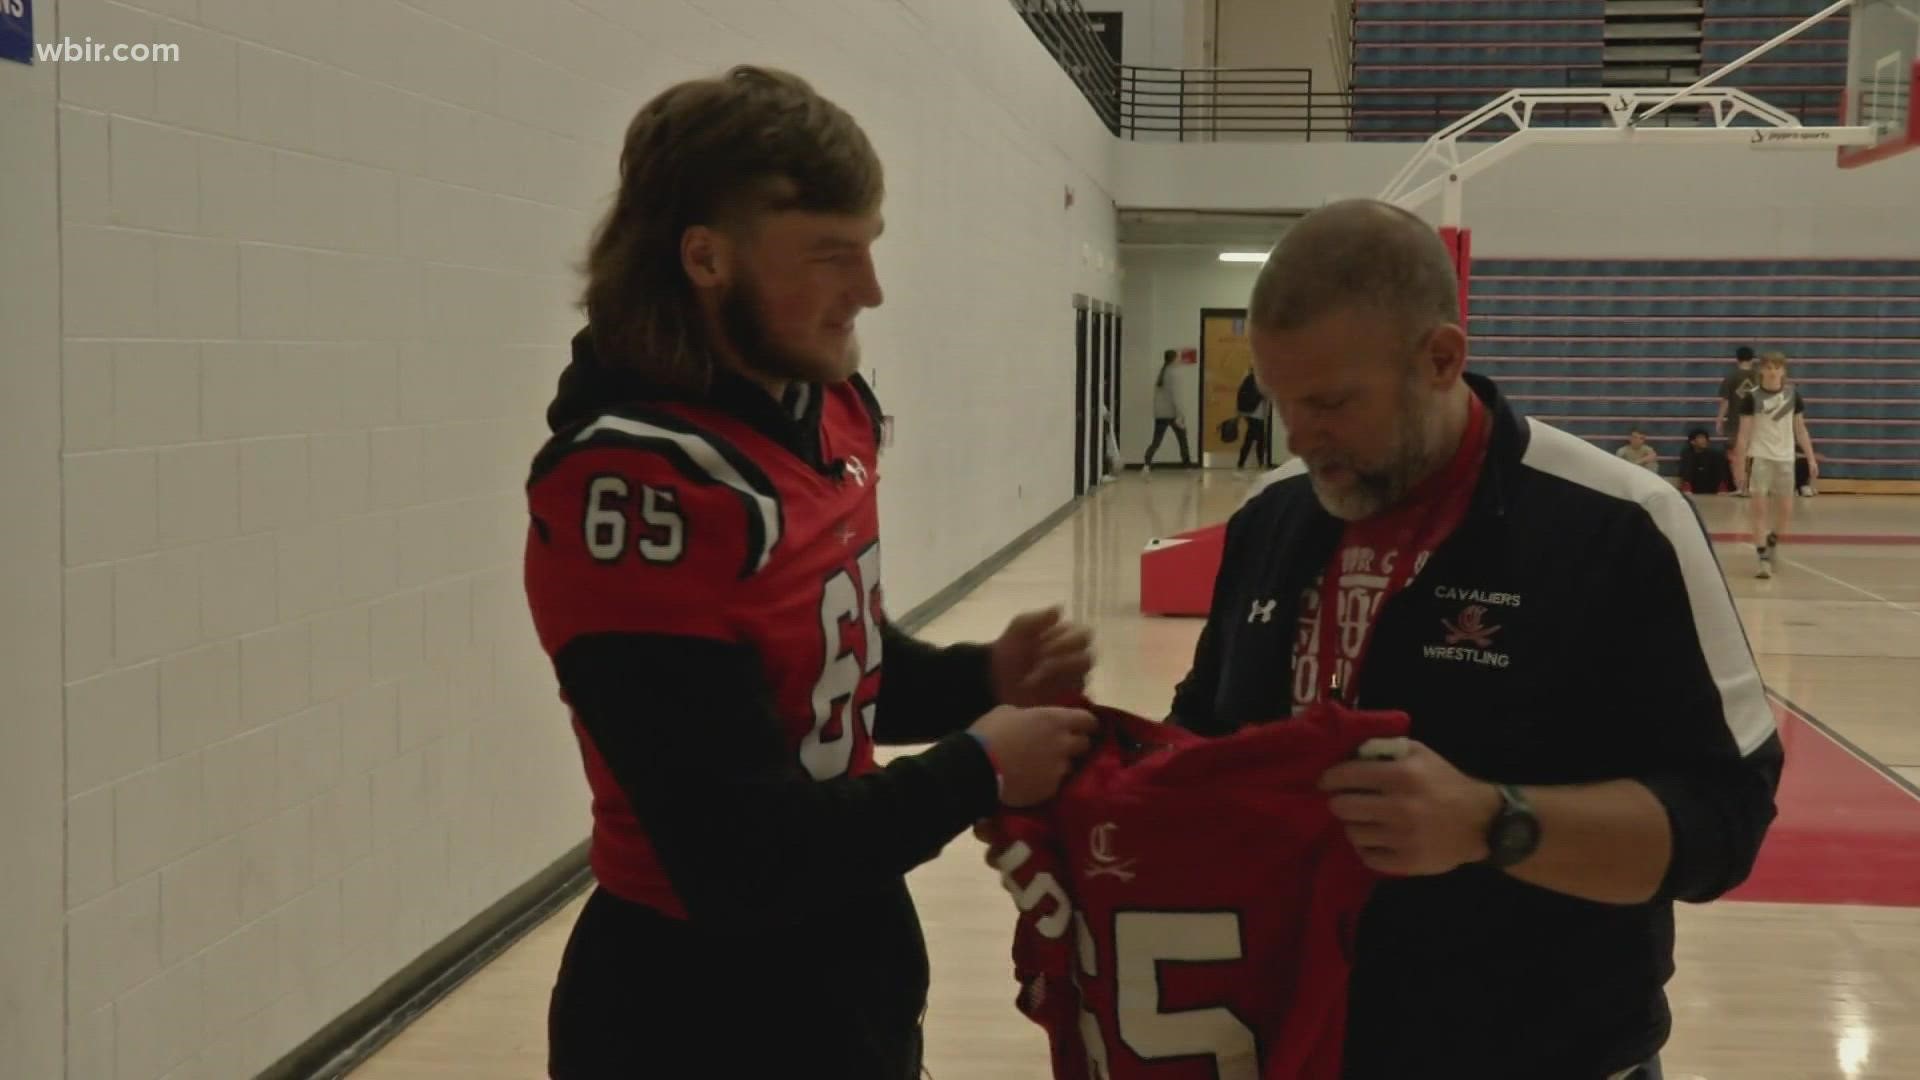 Cookeville High School seniors give jerseys to teachers and